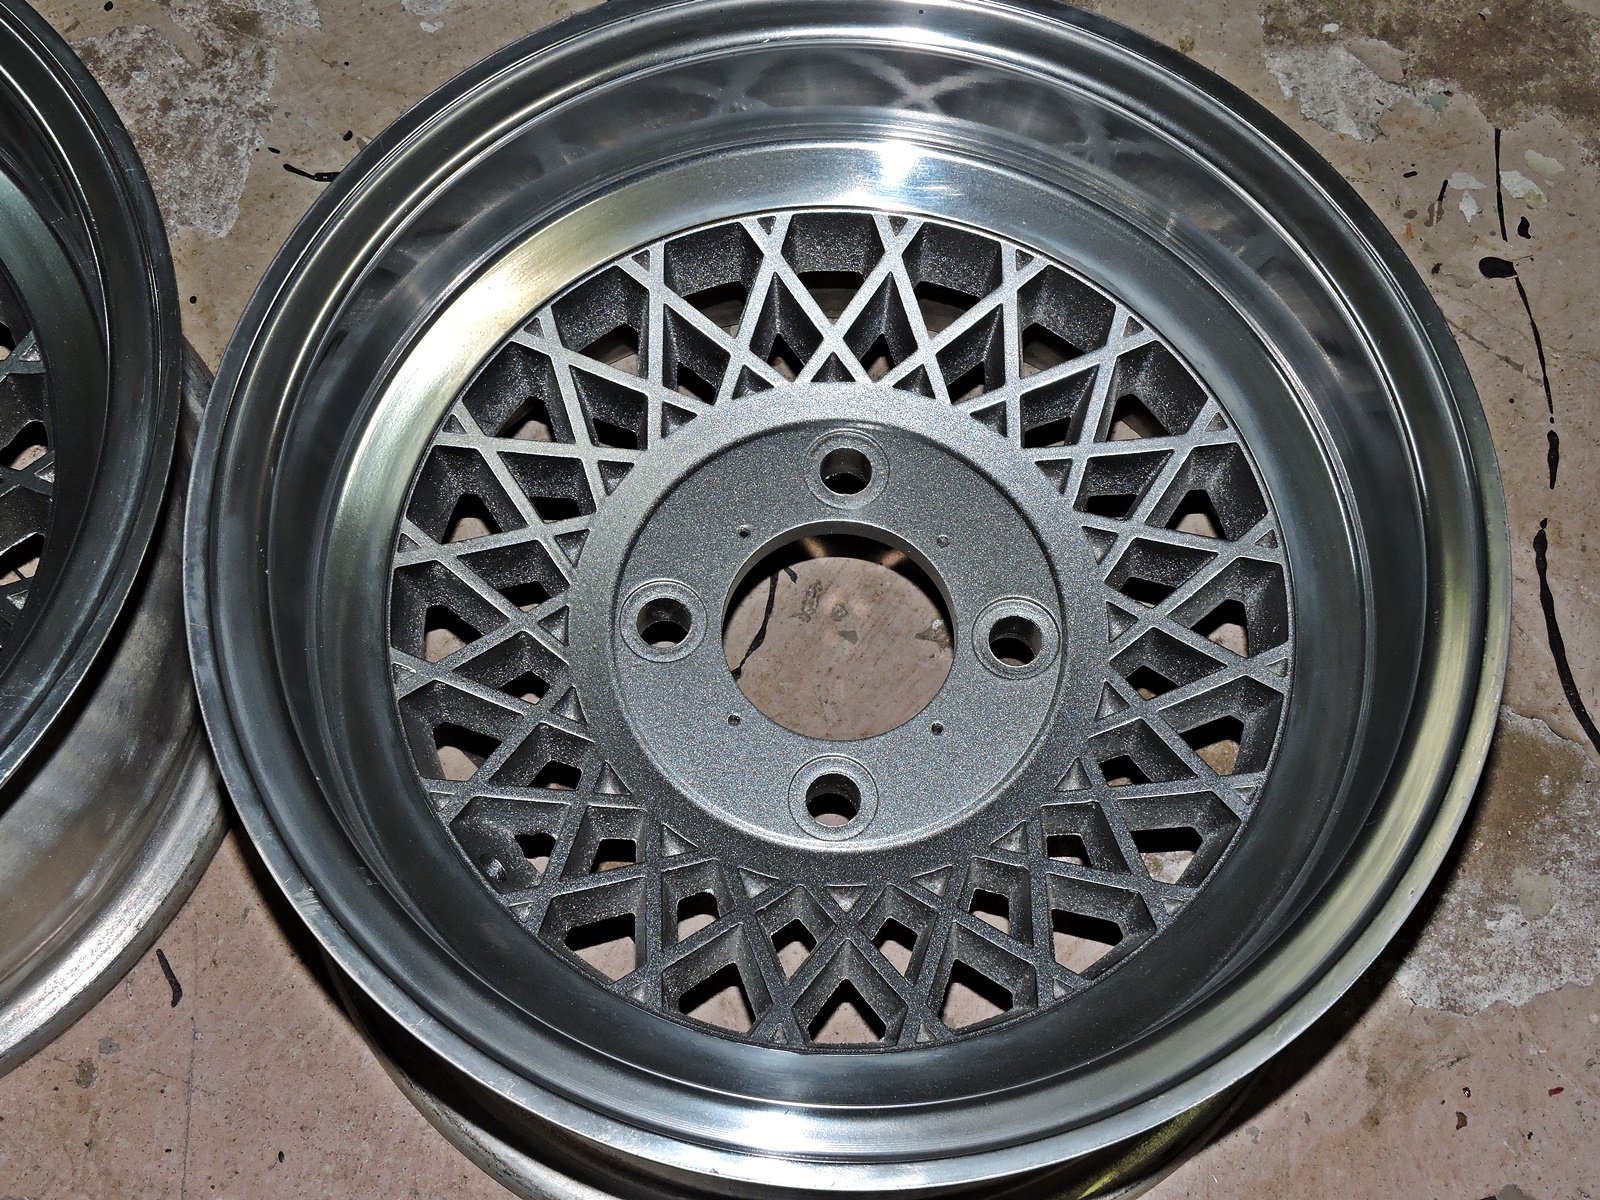 Freshly Refinished 14x7 Appliance Mesh Wheels - Parts for Sale - HybridZ